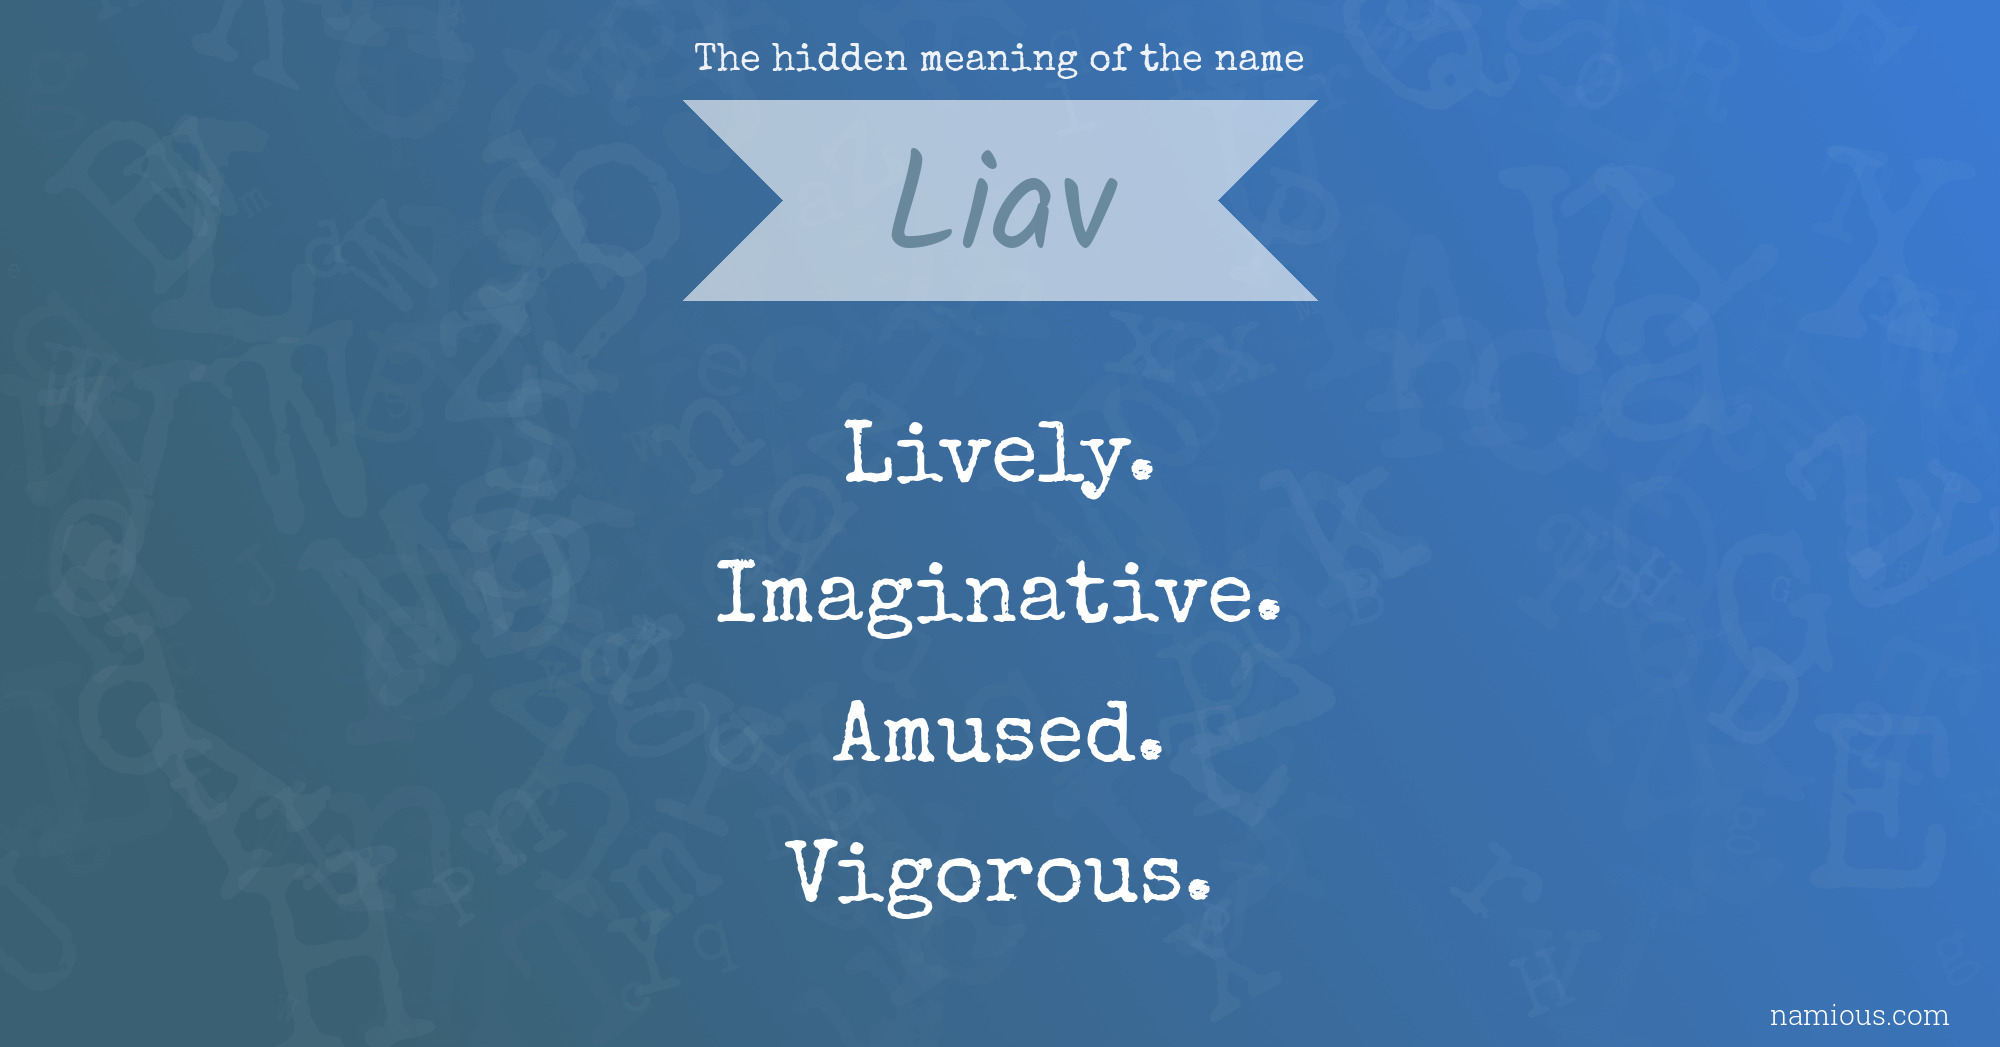 The hidden meaning of the name Liav